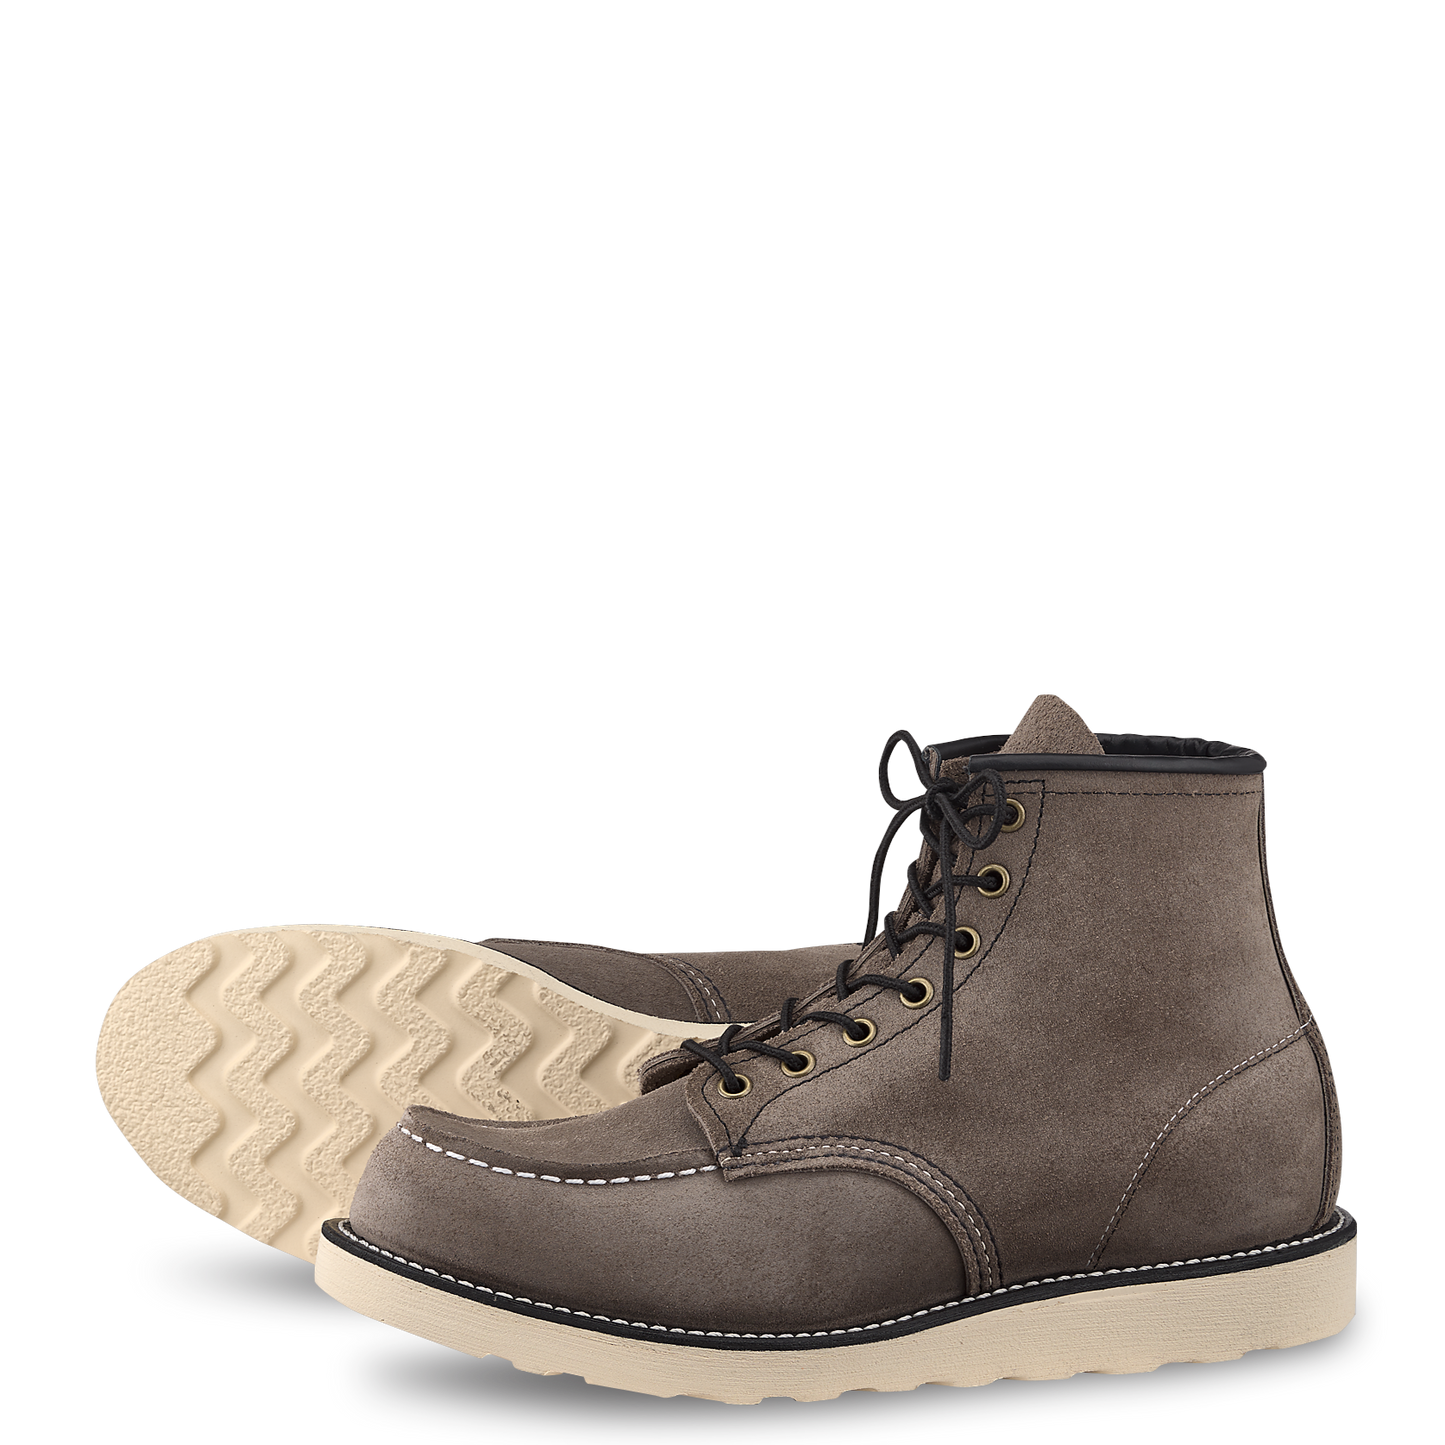 Red Wing 8863 6" Moc Toe Boot